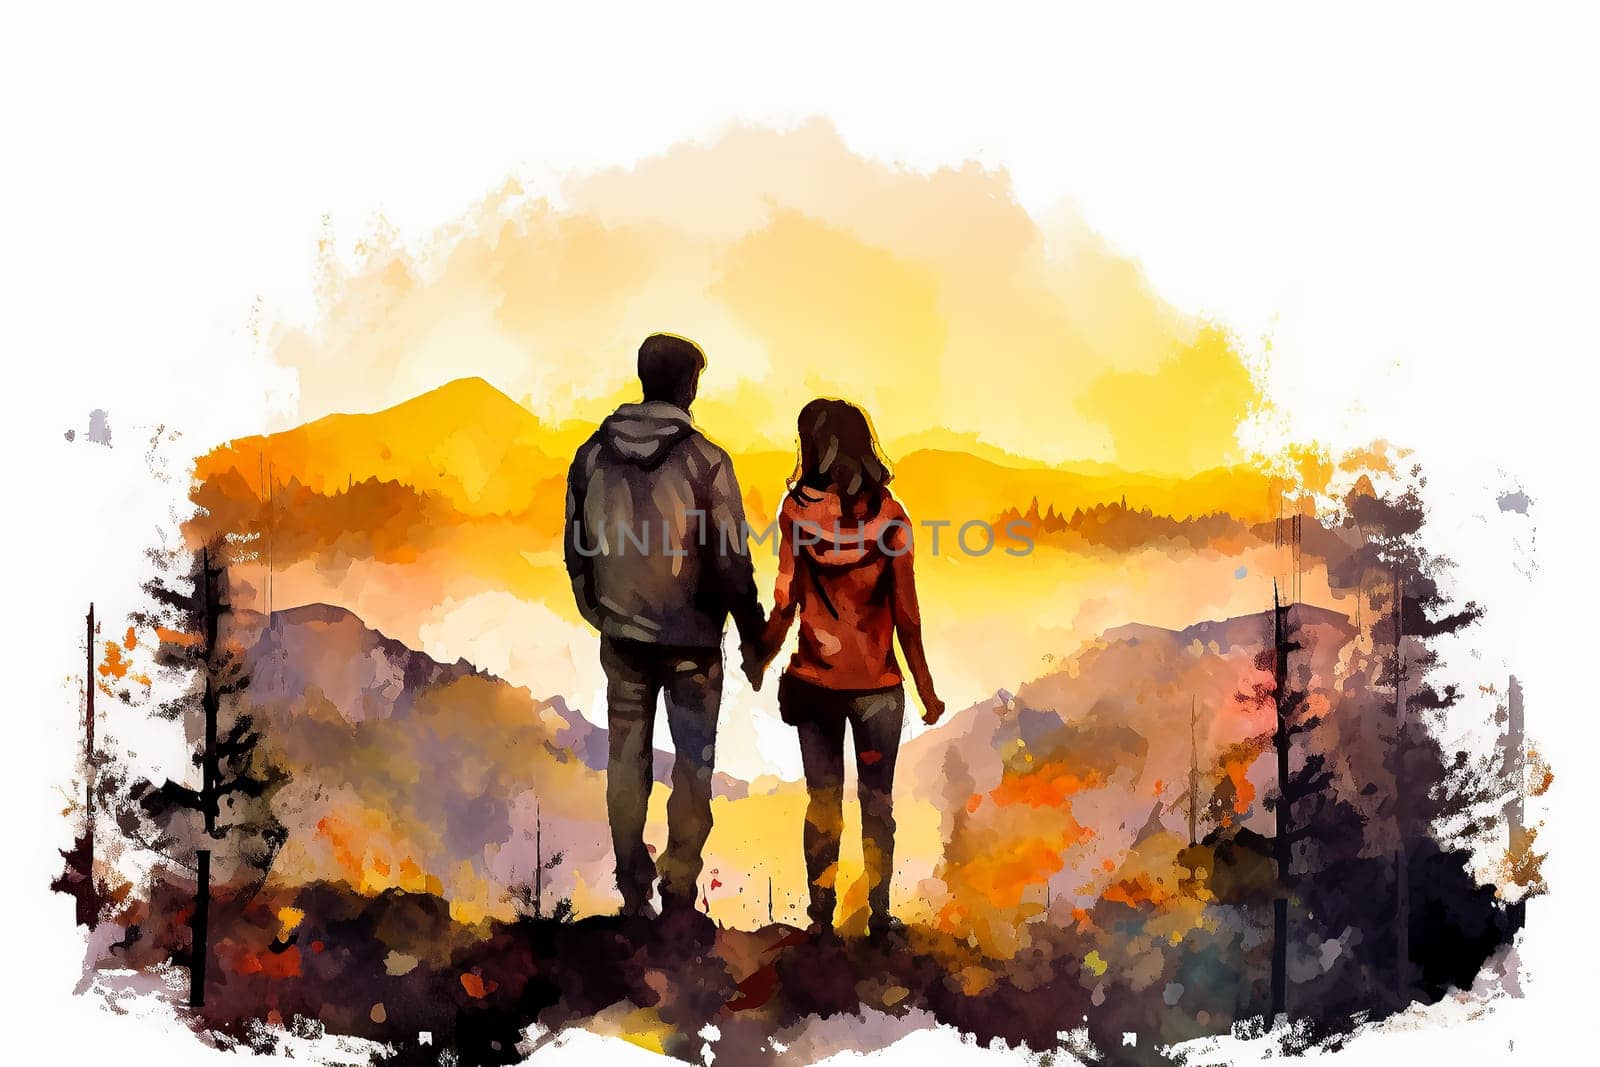 a watercolor illustration depicts a couple in a tender moment, gazing at the setting sun. by Alla_Morozova93